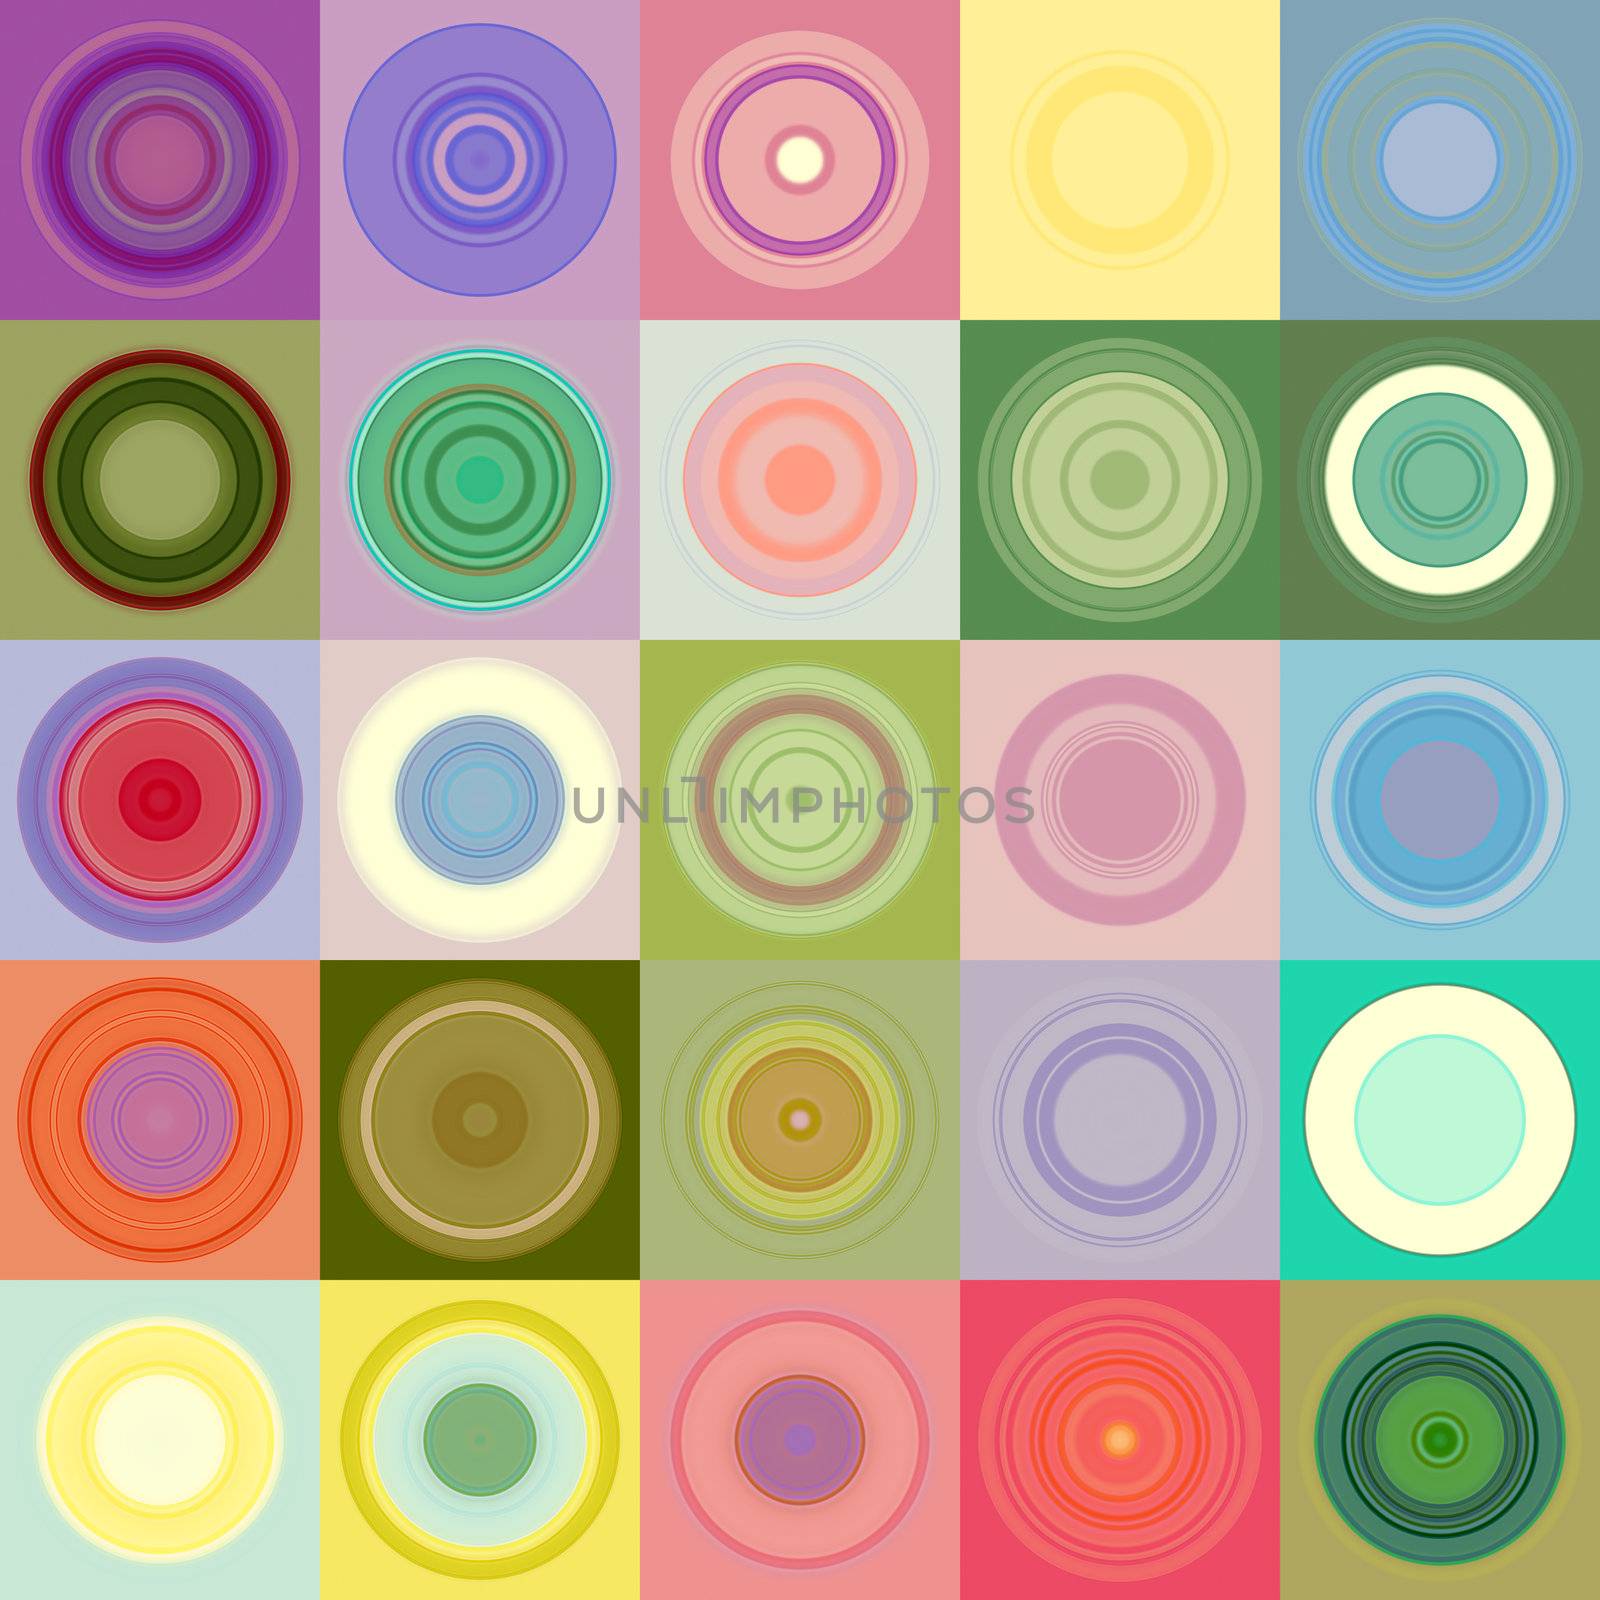 rounds in blocks pattern by weknow